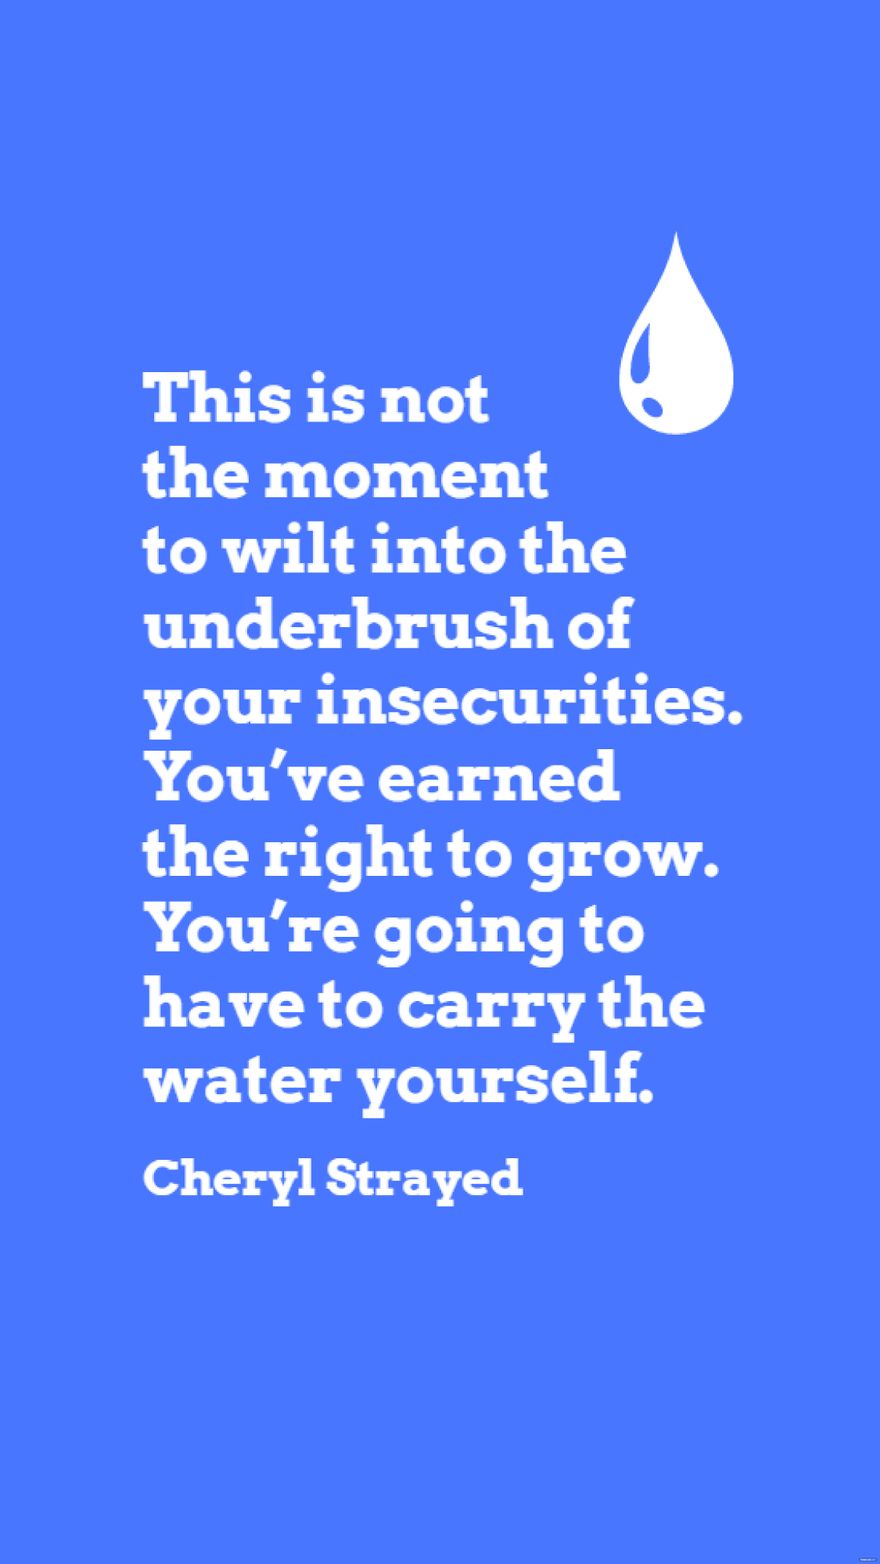 Cheryl Strayed - This is not the moment to wilt into the underbrush of your insecurities. You’ve earned the right to grow. You’re going to have to carry the water yourself.